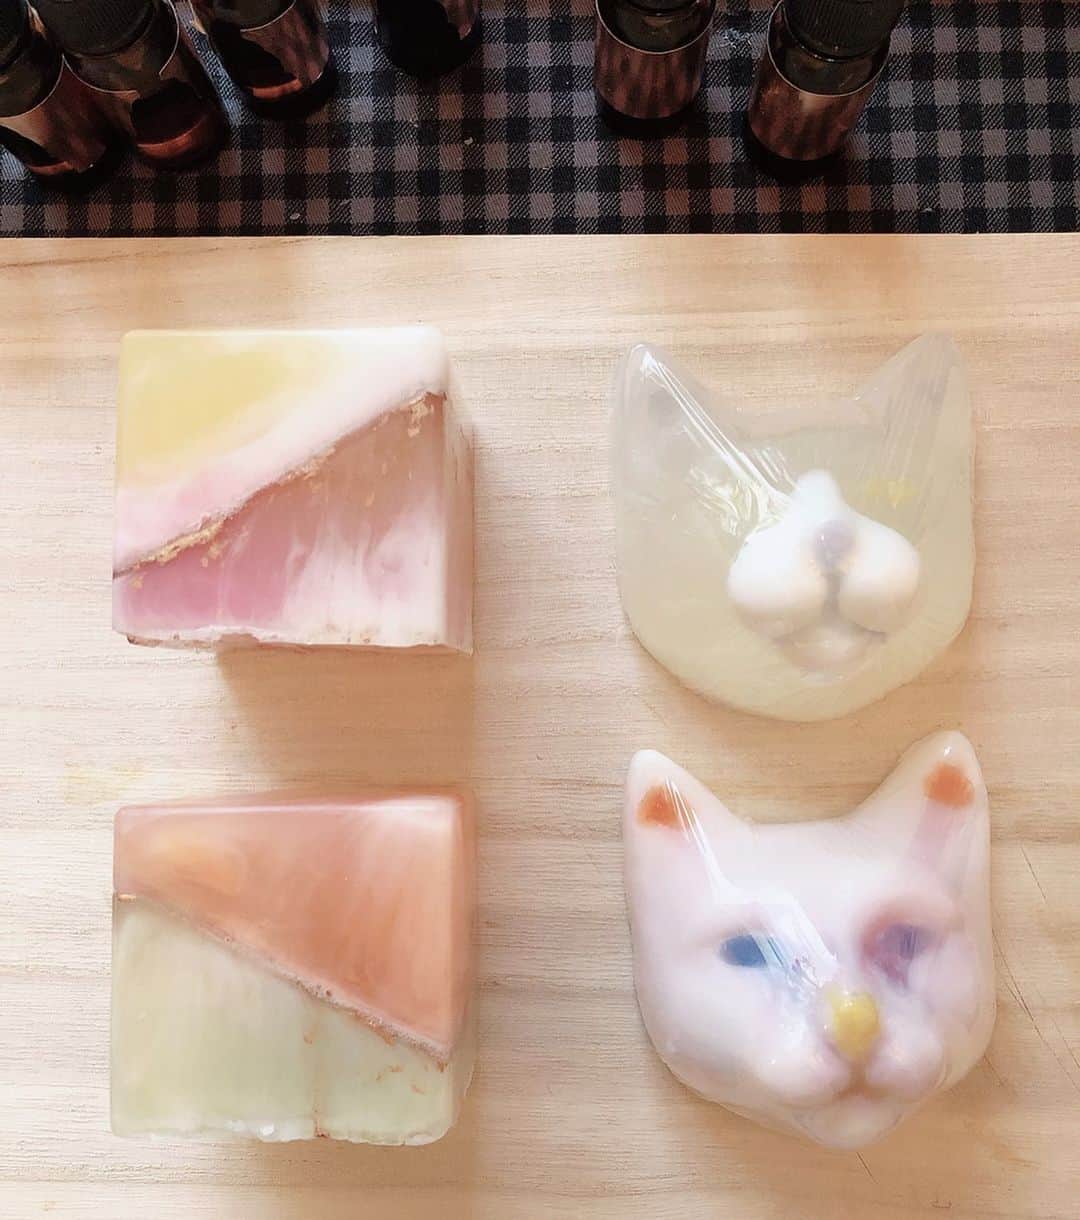 東美樹さんのインスタグラム写真 - (東美樹Instagram)「Stay in and be creative🎨 Such a strange time we are living in and I decided to take this opportunity to slow down and be more present.🐈🤍📝 enjoyed making “personalized soap” (with this sweet @maypakdee ♡x) using your original recipe- by colors, scents and other ingredients depending on your mood and condition. All the ingredients are natural and safe to use from head to toe even for people with sensitive skin🌿 I also love how I can customize the soap based on my horoscope to suit my star sign personality.🐠🌟 . Im so excited to use my own artisanal soaps ! Thanks for having me @9.kyuu ♥️ . 石鹸作りワークショップへ同じ事務所のMayちゃんと行ってきました🤍 コンセプトがとても面白く、 自分の今の心と身体の状態と、各星座の特性を合わせた自分だけのレシピを元に香りや色を決めていきます。 (私は魚座🐠🌟) . ※ラウレル硫酸塩、ラウリル酸、パラベン、合成着色料全て不使用🌏🍃 . 色も香りも全て天然由来で顔から身体まで使用できるそう。 香りは昔から大好きな定番のローズマリーとゼラニウムにしました🌿✨ . 使うのが勿体無いのでインテリアとしてバスルームにしばらく飾っていますが香りもいいし置いてるだけで気分が上がる♬ . 必要最低限以外は人混みや外に出ないように個人的に心がけている最近。 お家にいる時間がいつも以上に多くなるので楽しめるアイテムが増えてとても嬉しい✨ 出来上がりは思ってたものと少し違うワイルドな猫ちゃんになったけど今では愛着が湧いて愛おしいです🐈🧡🤎🤍笑 . #9kyuu #cosmiccube #sustainable #handmadesoap #naturalsoap #mindfulness #blissful #naturallife #zen #キュウ #パーソナライズソープ #アロマ #占星術 #ホロスコープ #サステナブル #マインドフルネス #自然派 #敏感肌 #手作り石鹸」3月25日 18時43分 - mikko.36___